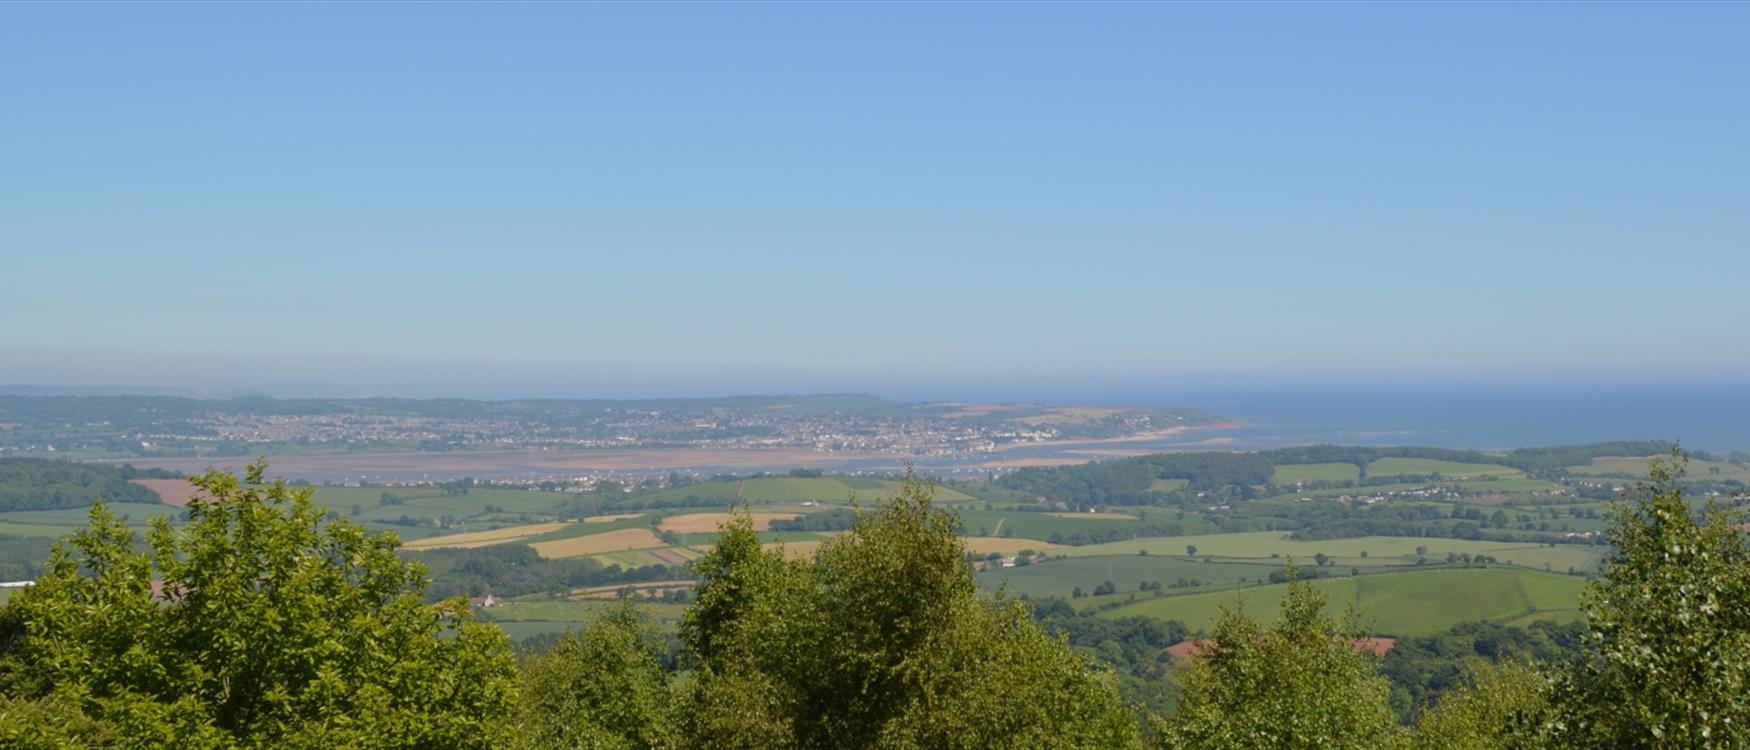 Mamhead view towards Exmouth